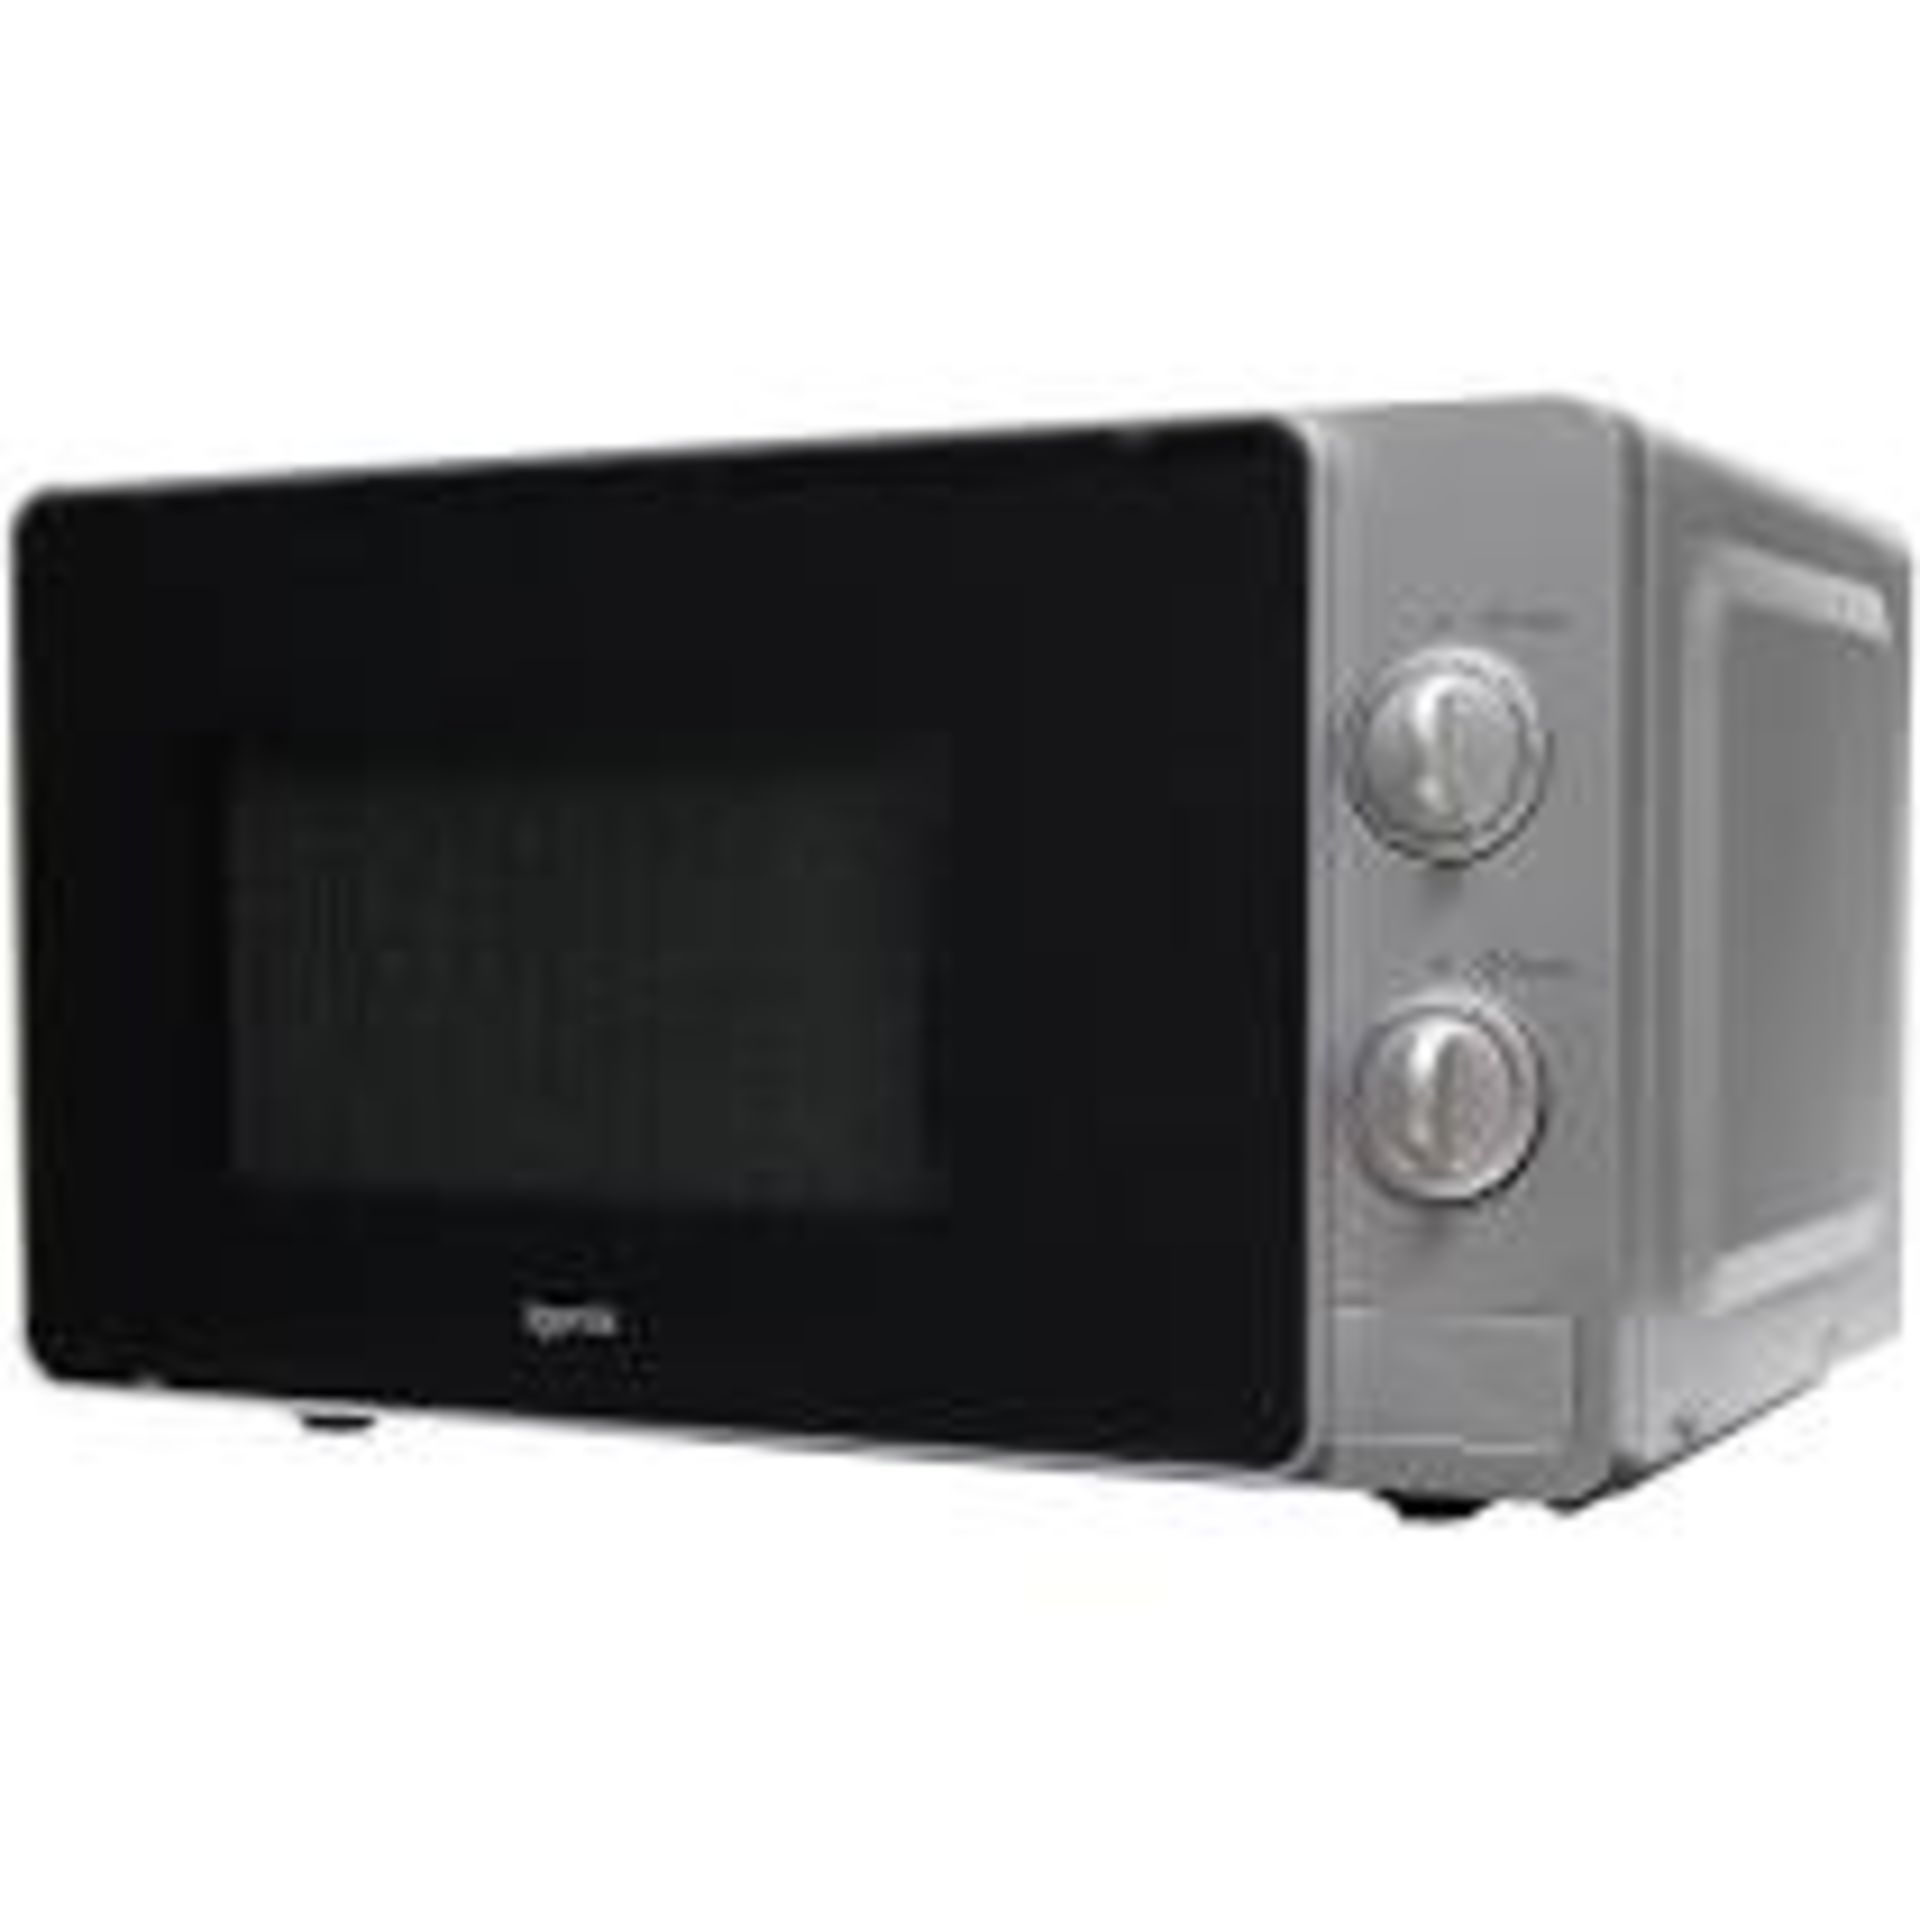 Boxed Igenix IG20815 Silver Manual Microwave RRP £